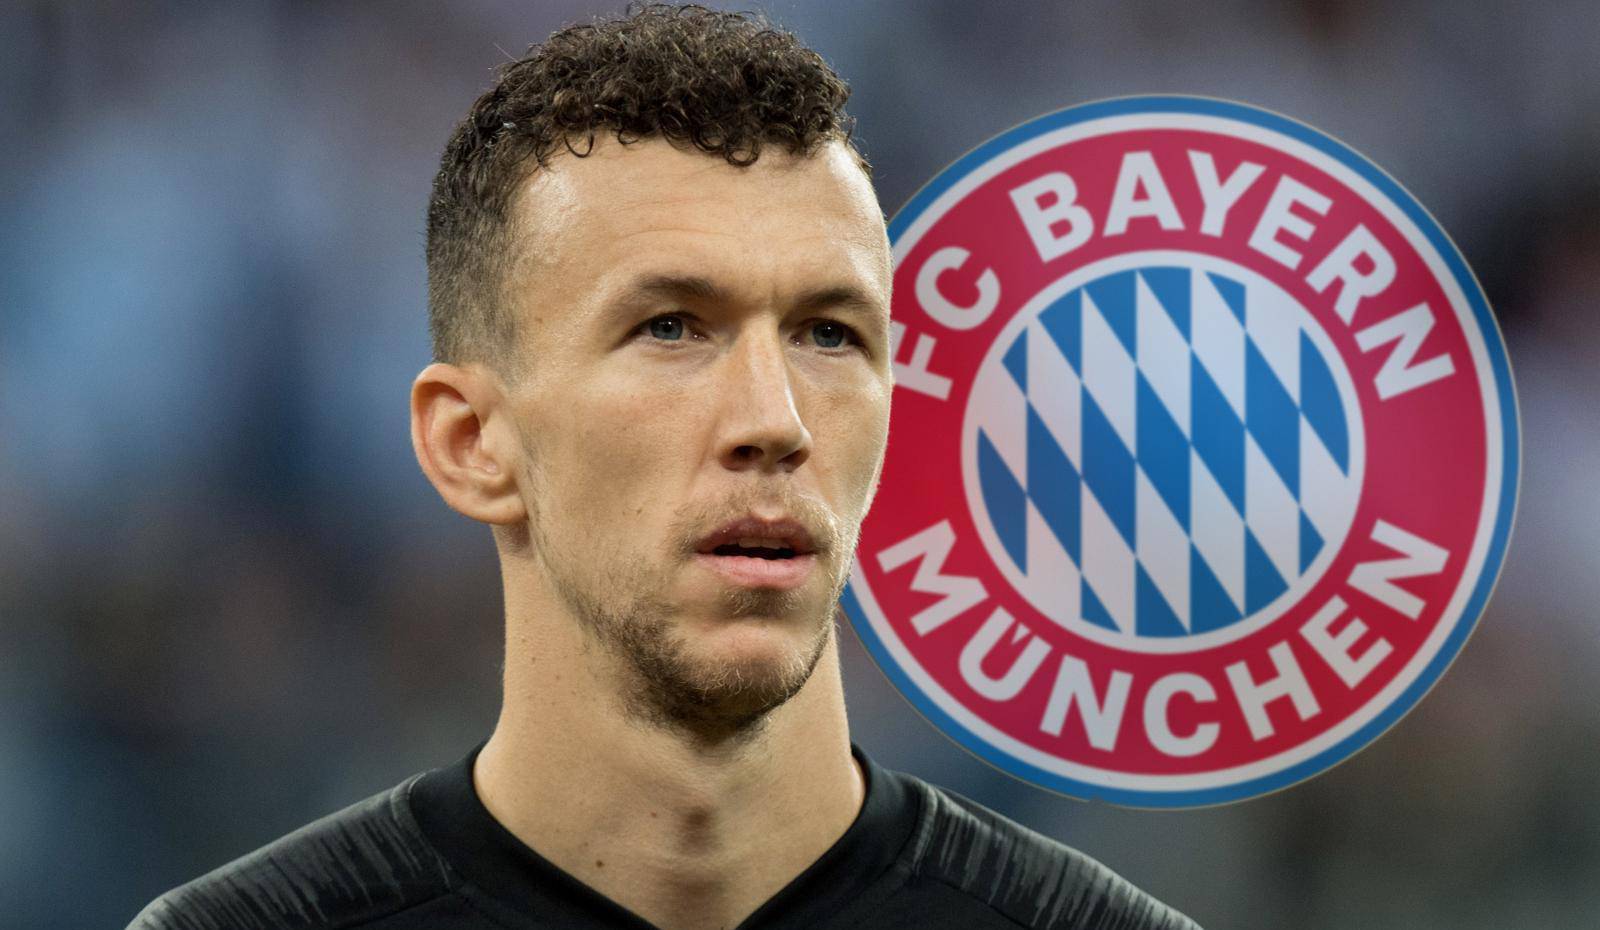 Ivan PERISIC apparently before changing to FC Bayern Munich.